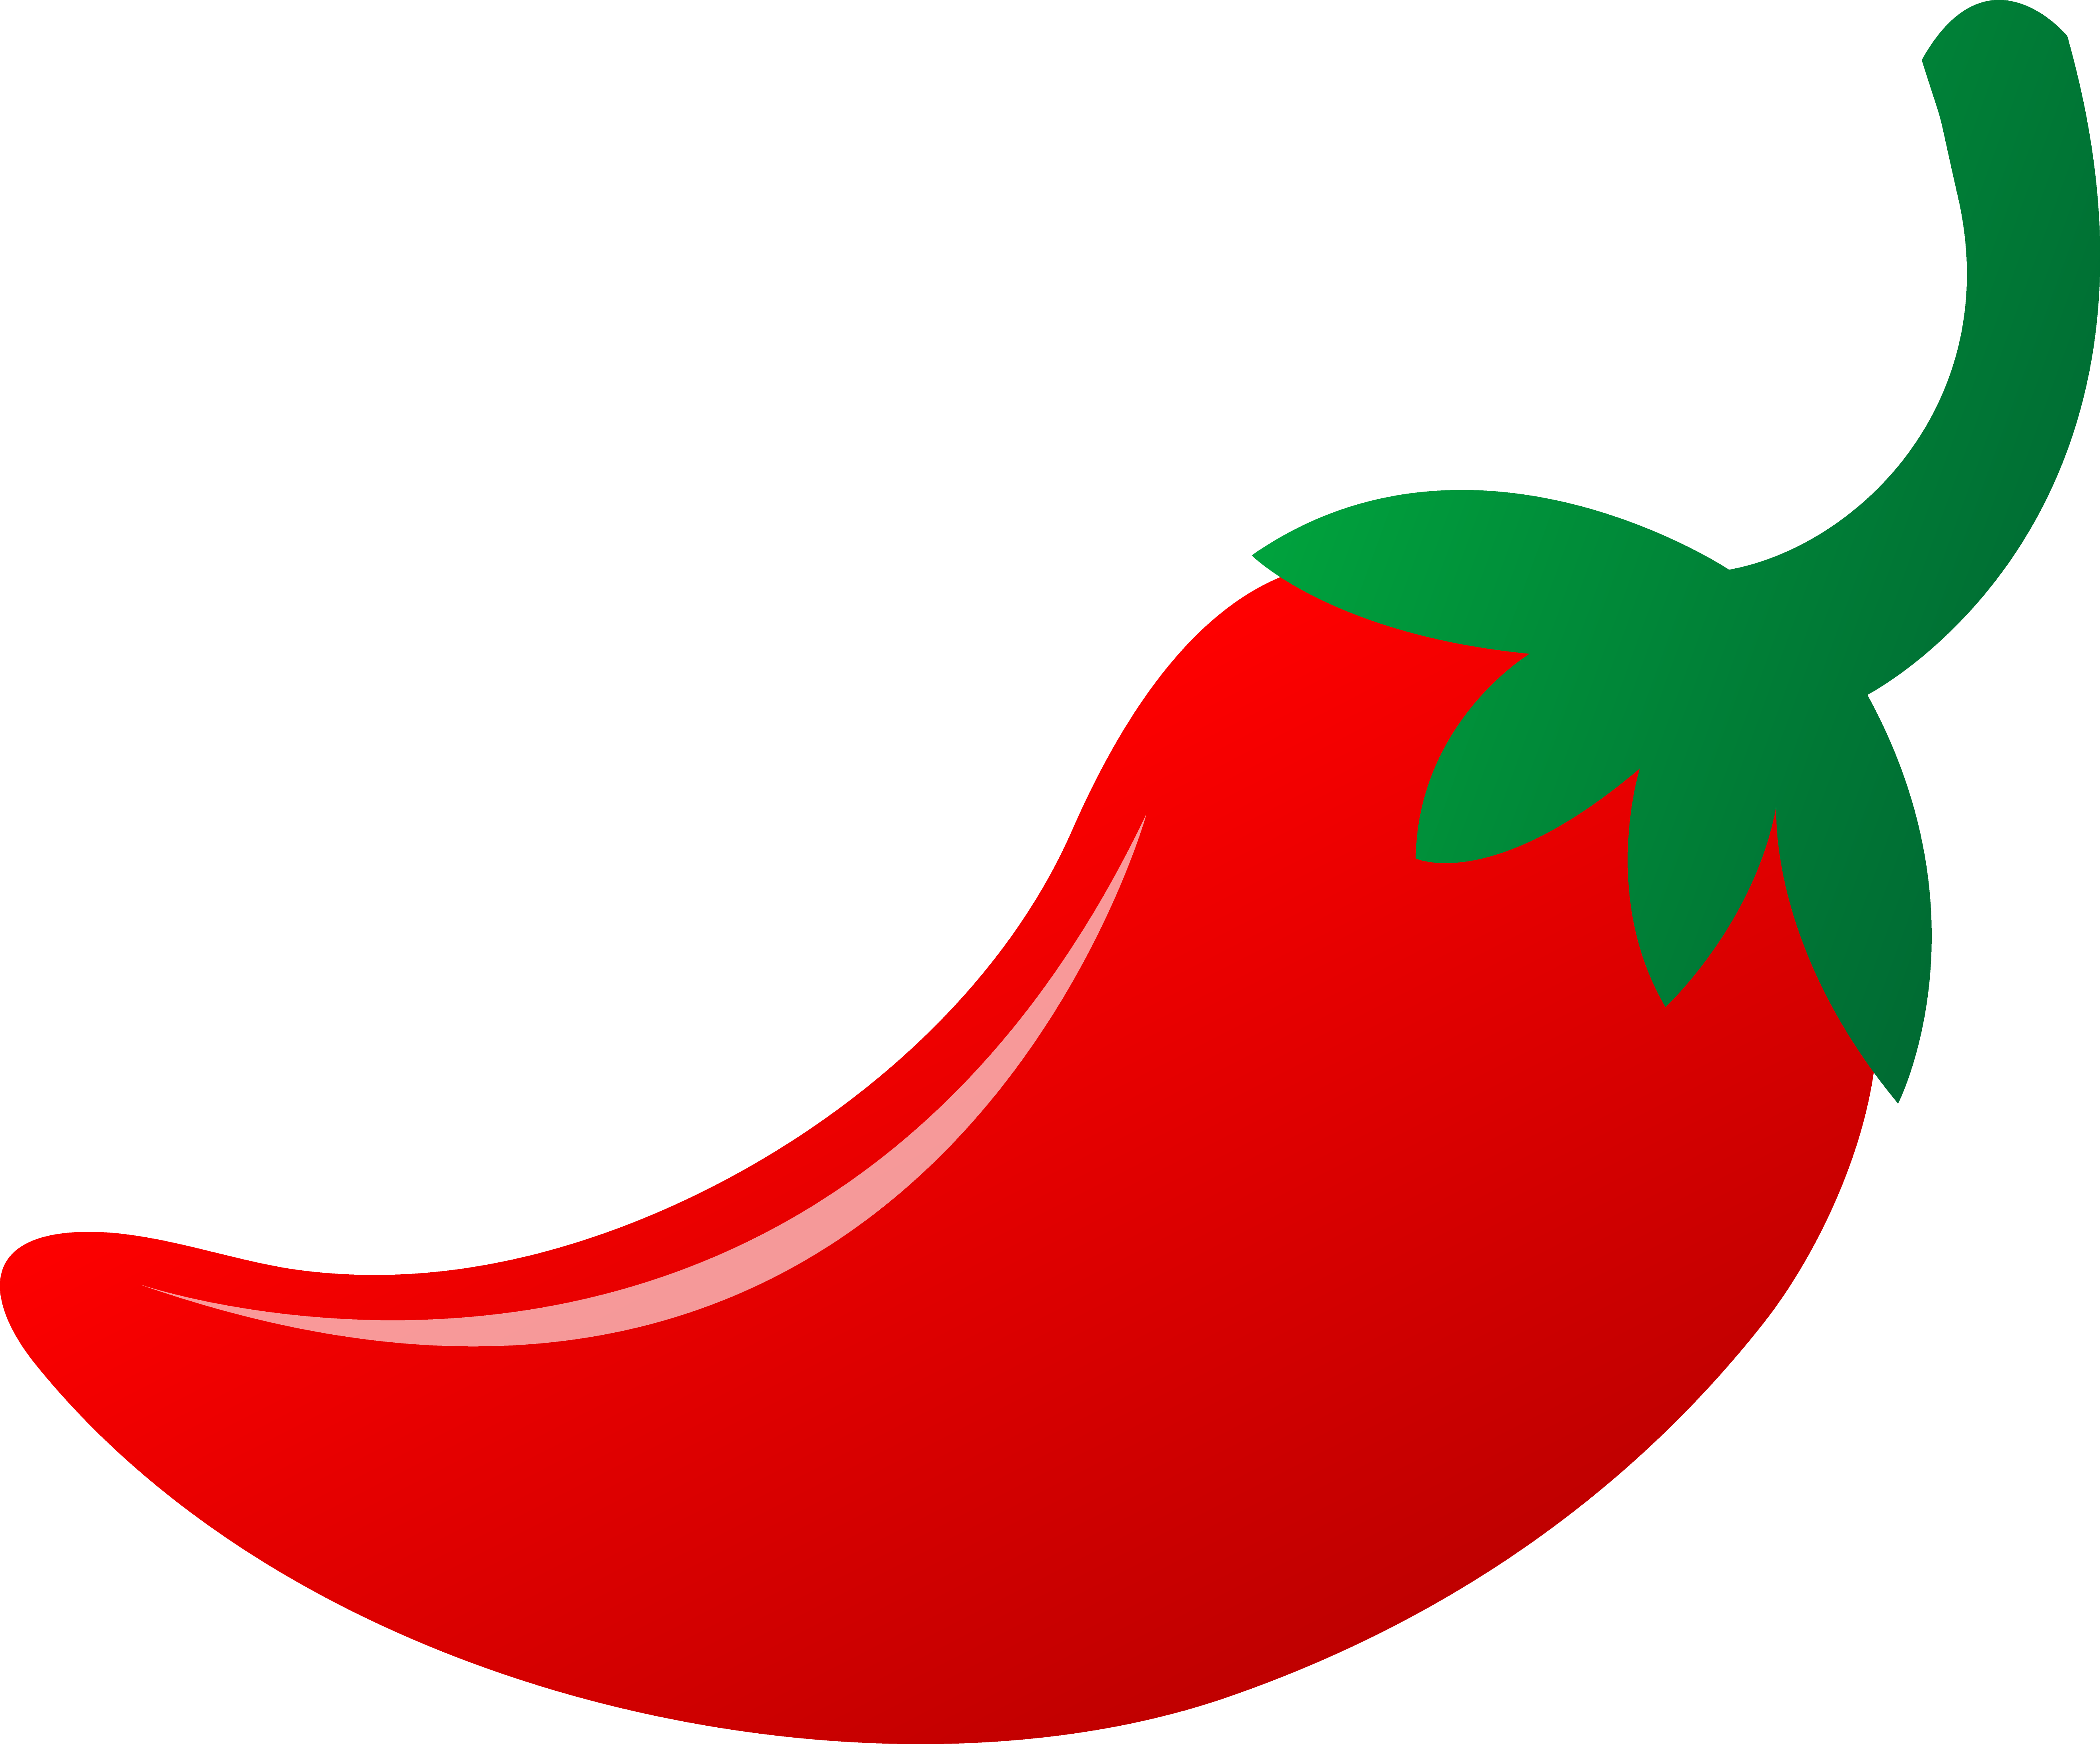 Chili peppers how hot. Vegetables clipart bell pepper